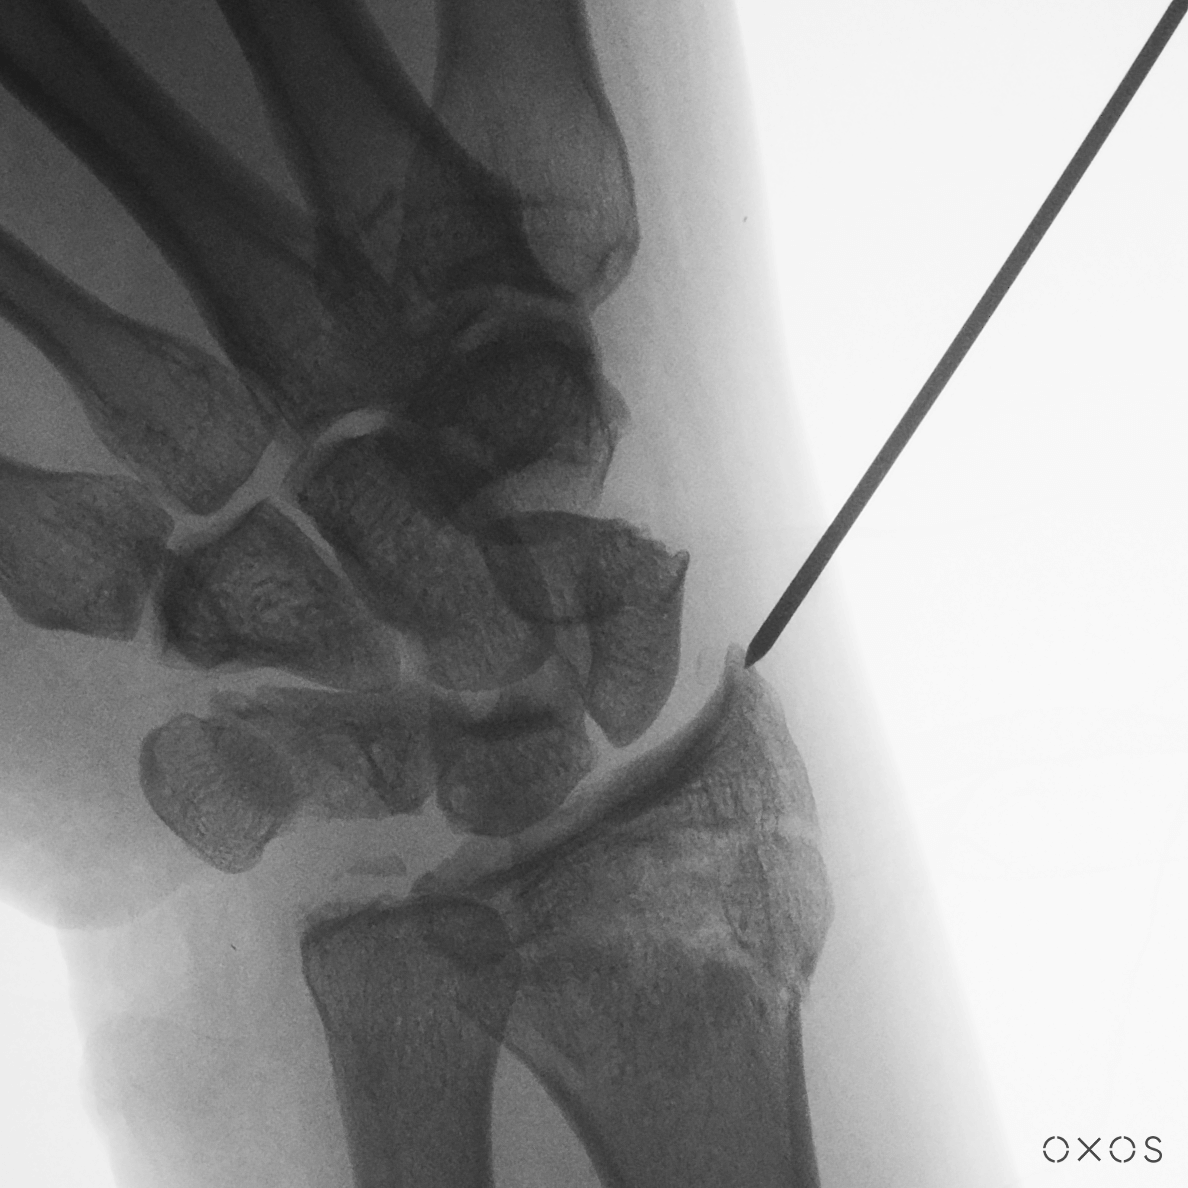 Image of percutaneous pinning of Wrist fracture Using Micro C, 9.7 µGy